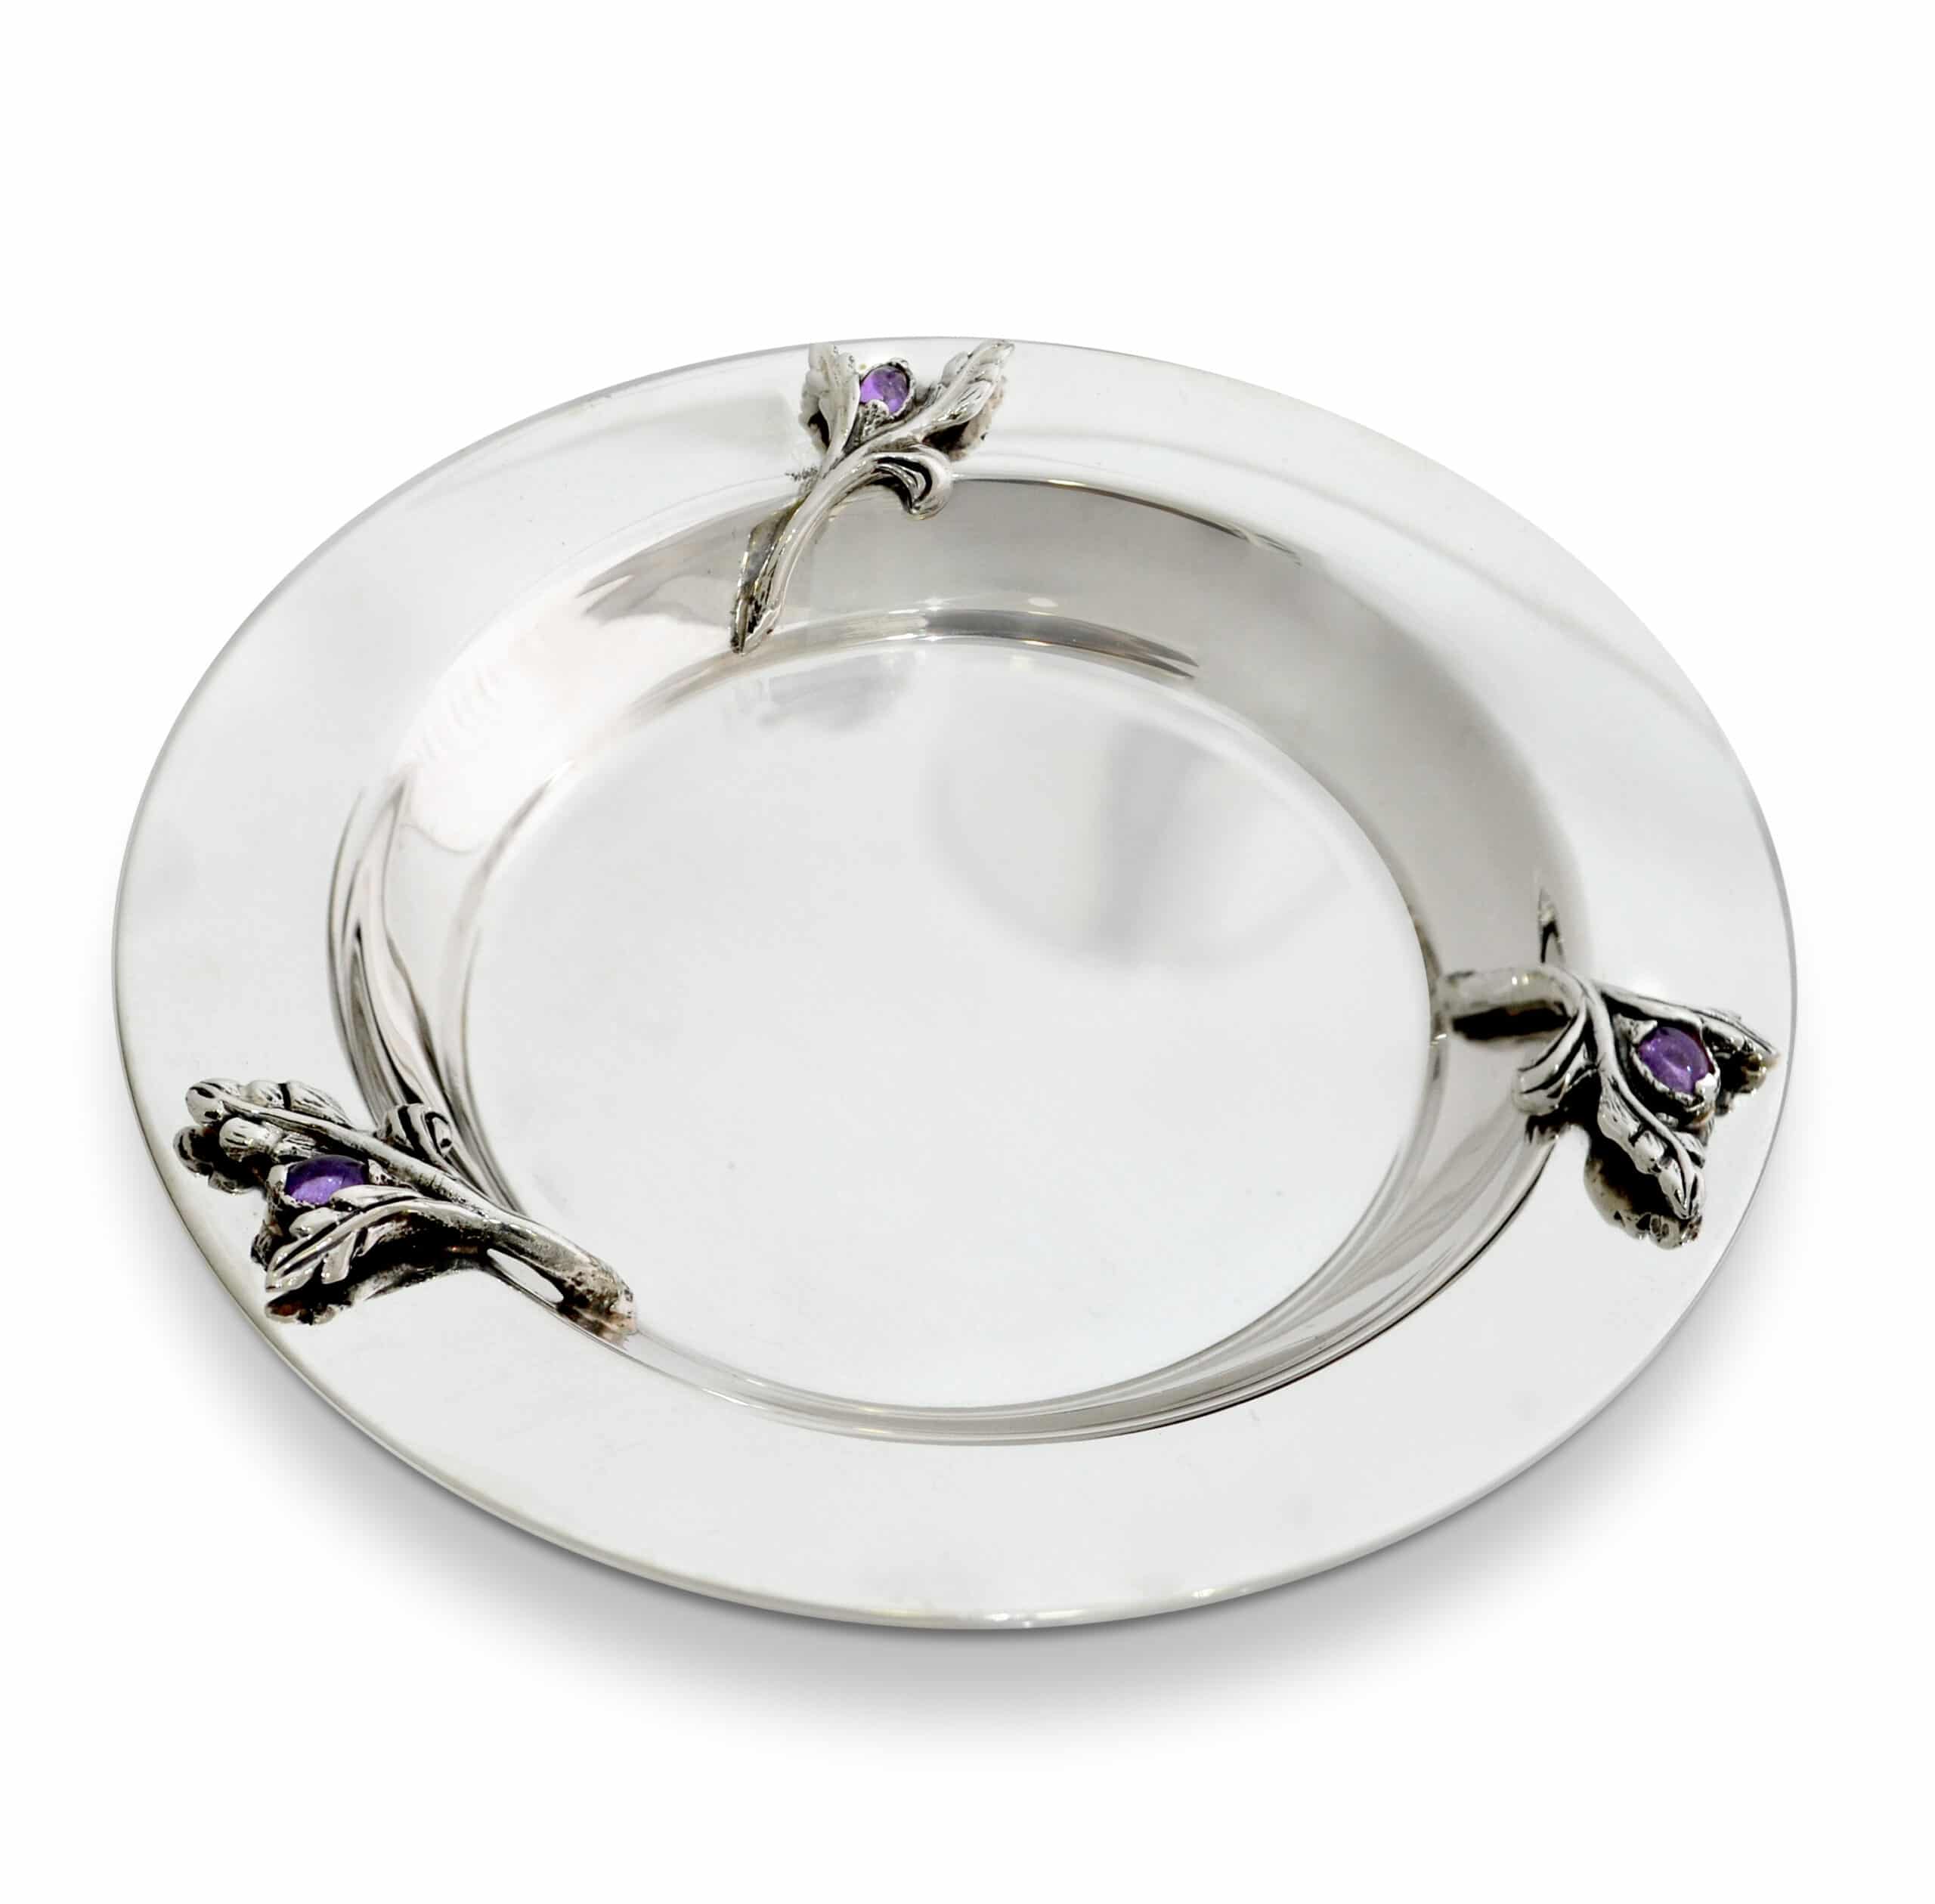 Silver Plate With Silver Leaves & Natural Amethyst Stones